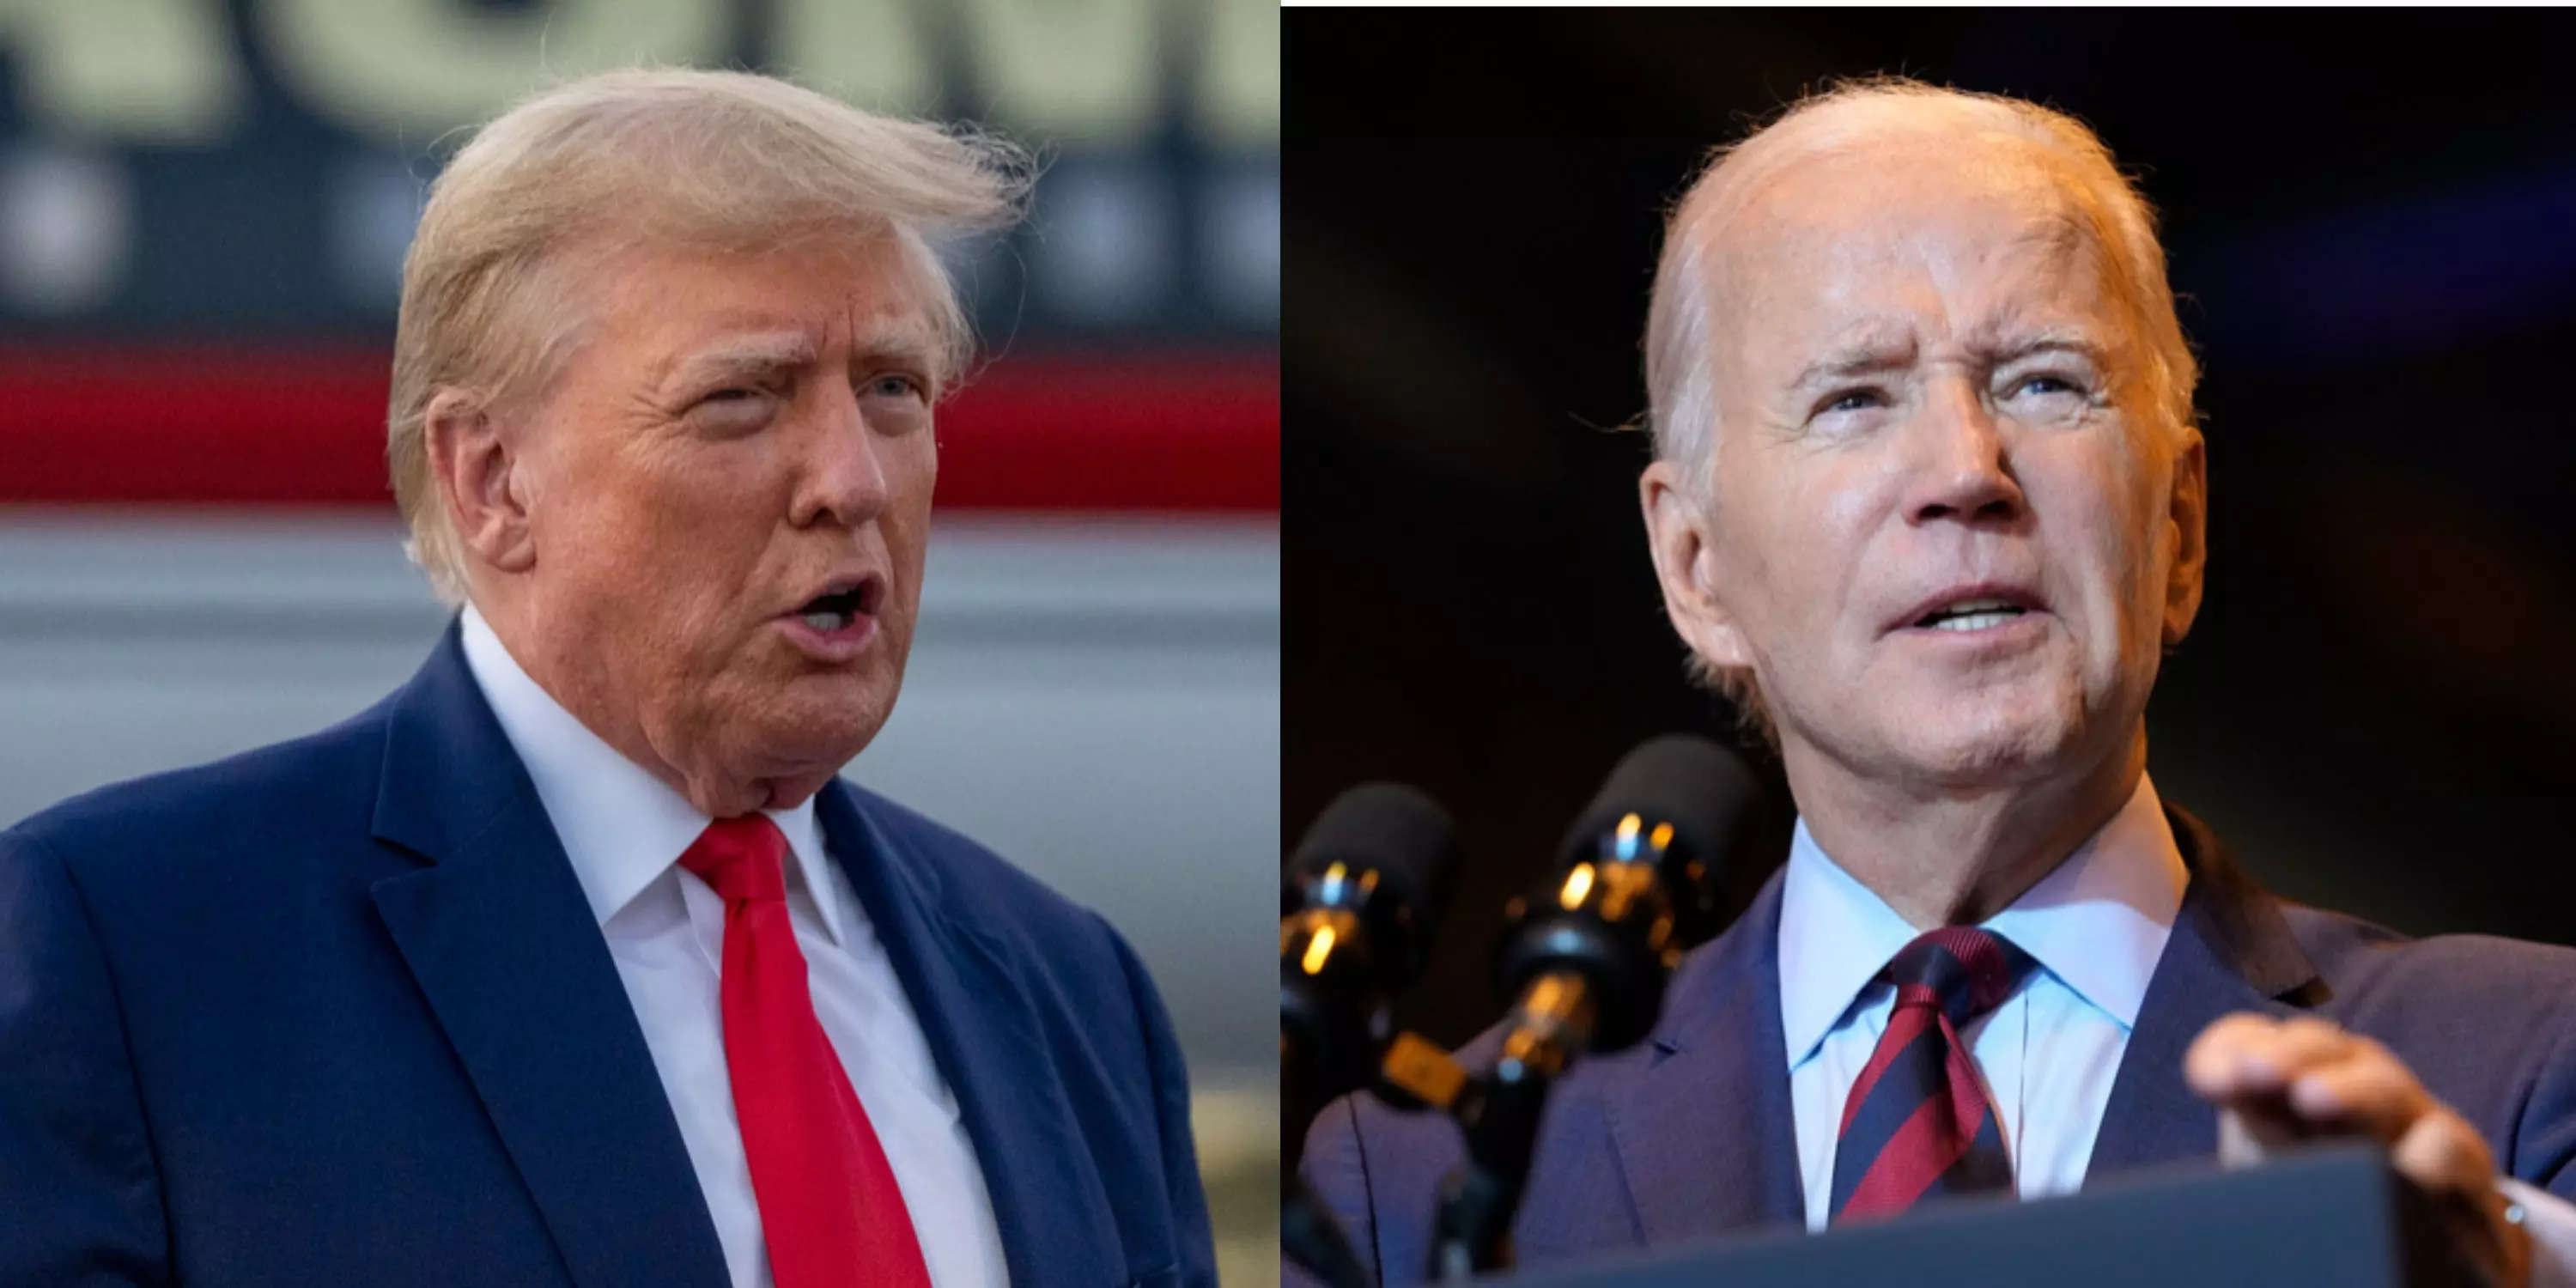 Trump leads Biden by 10 points in newlyreleased national poll of the